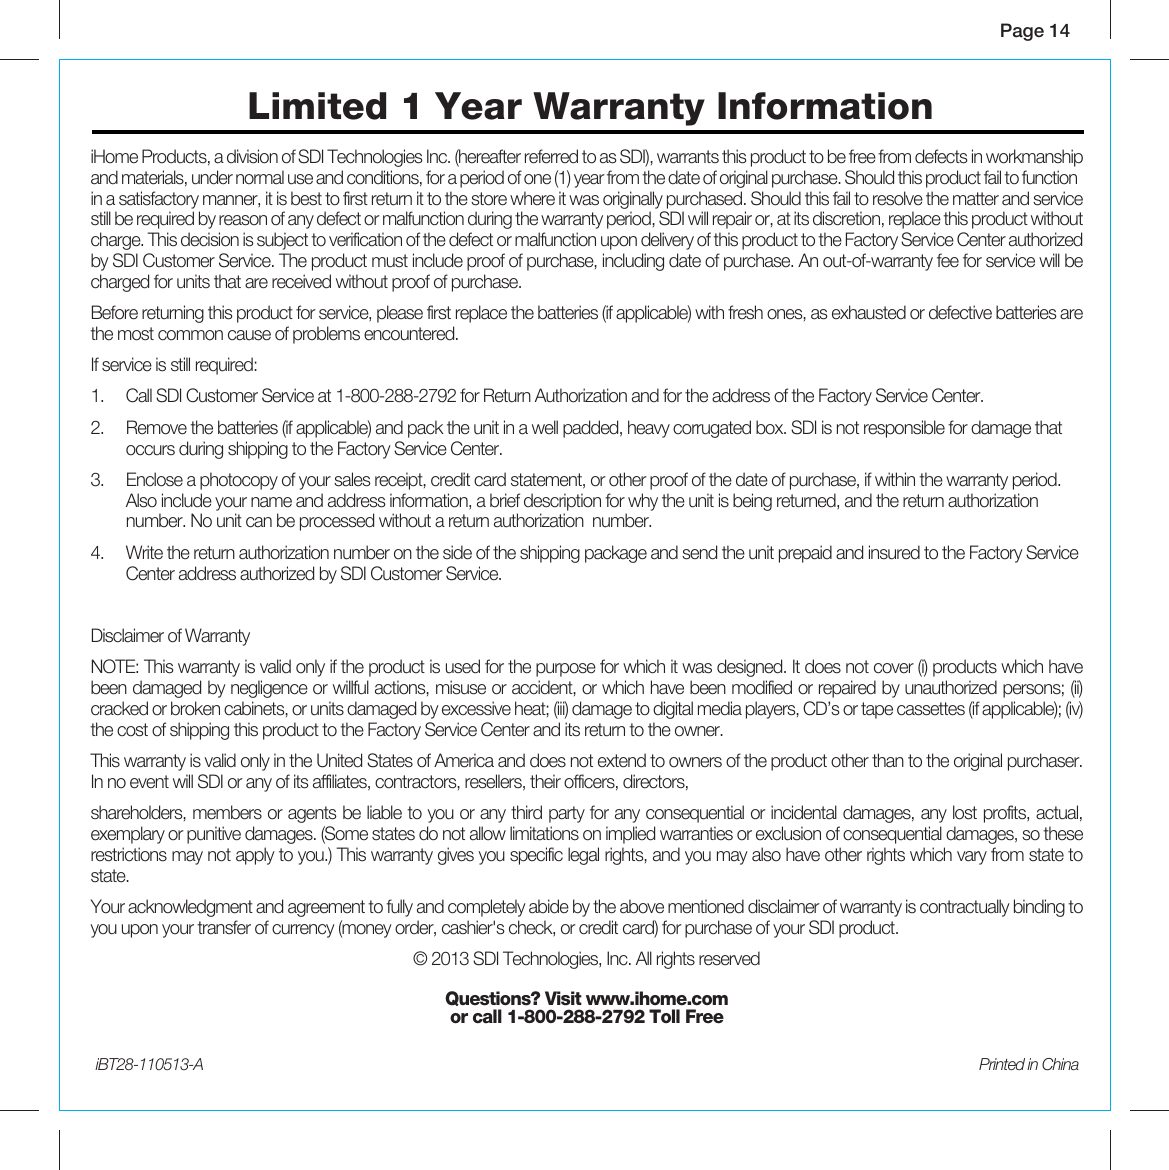 Page 14iBT28-110513-A  Printed in ChinaiHome Products, a division of SDI Technologies Inc. (hereafter referred to as SDI), warrants this product to be free from defects in workmanship and materials, under normal use and conditions, for a period of one (1) year from the date of original purchase. Should this product fail to function in a satisfactory manner, it is best to first return it to the store where it was originally purchased. Should this fail to resolve the matter and service still be required by reason of any defect or malfunction during the warranty period, SDI will repair or, at its discretion, replace this product without charge. This decision is subject to verification of the defect or malfunction upon delivery of this product to the Factory Service Center authorized by SDI Customer Service. The product must include proof of purchase, including date of purchase. An out-of-warranty fee for service will be charged for units that are received without proof of purchase.Before returning this product for service, please first replace the batteries (if applicable) with fresh ones, as exhausted or defective batteries are the most common cause of problems encountered.If service is still required:1.   Call SDI Customer Service at 1-800-288-2792 for Return Authorization and for the address of the Factory Service Center. 2.   Remove the batteries (if applicable) and pack the unit in a well padded, heavy corrugated box. SDI is not responsible for damage that    occurs during shipping to the Factory Service Center.3.   Enclose a photocopy of your sales receipt, credit card statement, or other proof of the date of purchase, if within the warranty period.     Also include your name and address information, a brief description for why the unit is being returned, and the return authorization      number. No unit can be processed without a return authorization  number.4.   Write the return authorization number on the side of the shipping package and send the unit prepaid and insured to the Factory Service    Center address authorized by SDI Customer Service.Disclaimer of WarrantyNOTE: This warranty is valid only if the product is used for the purpose for which it was designed. It does not cover (i) products which have been damaged by negligence or willful actions, misuse or accident, or which have been modified or repaired by unauthorized persons; (ii) cracked or broken cabinets, or units damaged by excessive heat; (iii) damage to digital media players, CD’s or tape cassettes (if applicable); (iv) the cost of shipping this product to the Factory Service Center and its return to the owner.This warranty is valid only in the United States of America and does not extend to owners of the product other than to the original purchaser. In no event will SDI or any of its affiliates, contractors, resellers, their officers, directors, shareholders, members or agents be liable to you or any third party for any consequential or incidental damages, any lost profits, actual, exemplary or punitive damages. (Some states do not allow limitations on implied warranties or exclusion of consequential damages, so these restrictions may not apply to you.) This warranty gives you specific legal rights, and you may also have other rights which vary from state to state.Your acknowledgment and agreement to fully and completely abide by the above mentioned disclaimer of warranty is contractually binding to you upon your transfer of currency (money order, cashier&apos;s check, or credit card) for purchase of your SDI product.© 2013 SDI Technologies, Inc. All rights reservedQuestions? Visit www.ihome.com or call 1-800-288-2792 Toll FreeLimited 1 Year Warranty Information